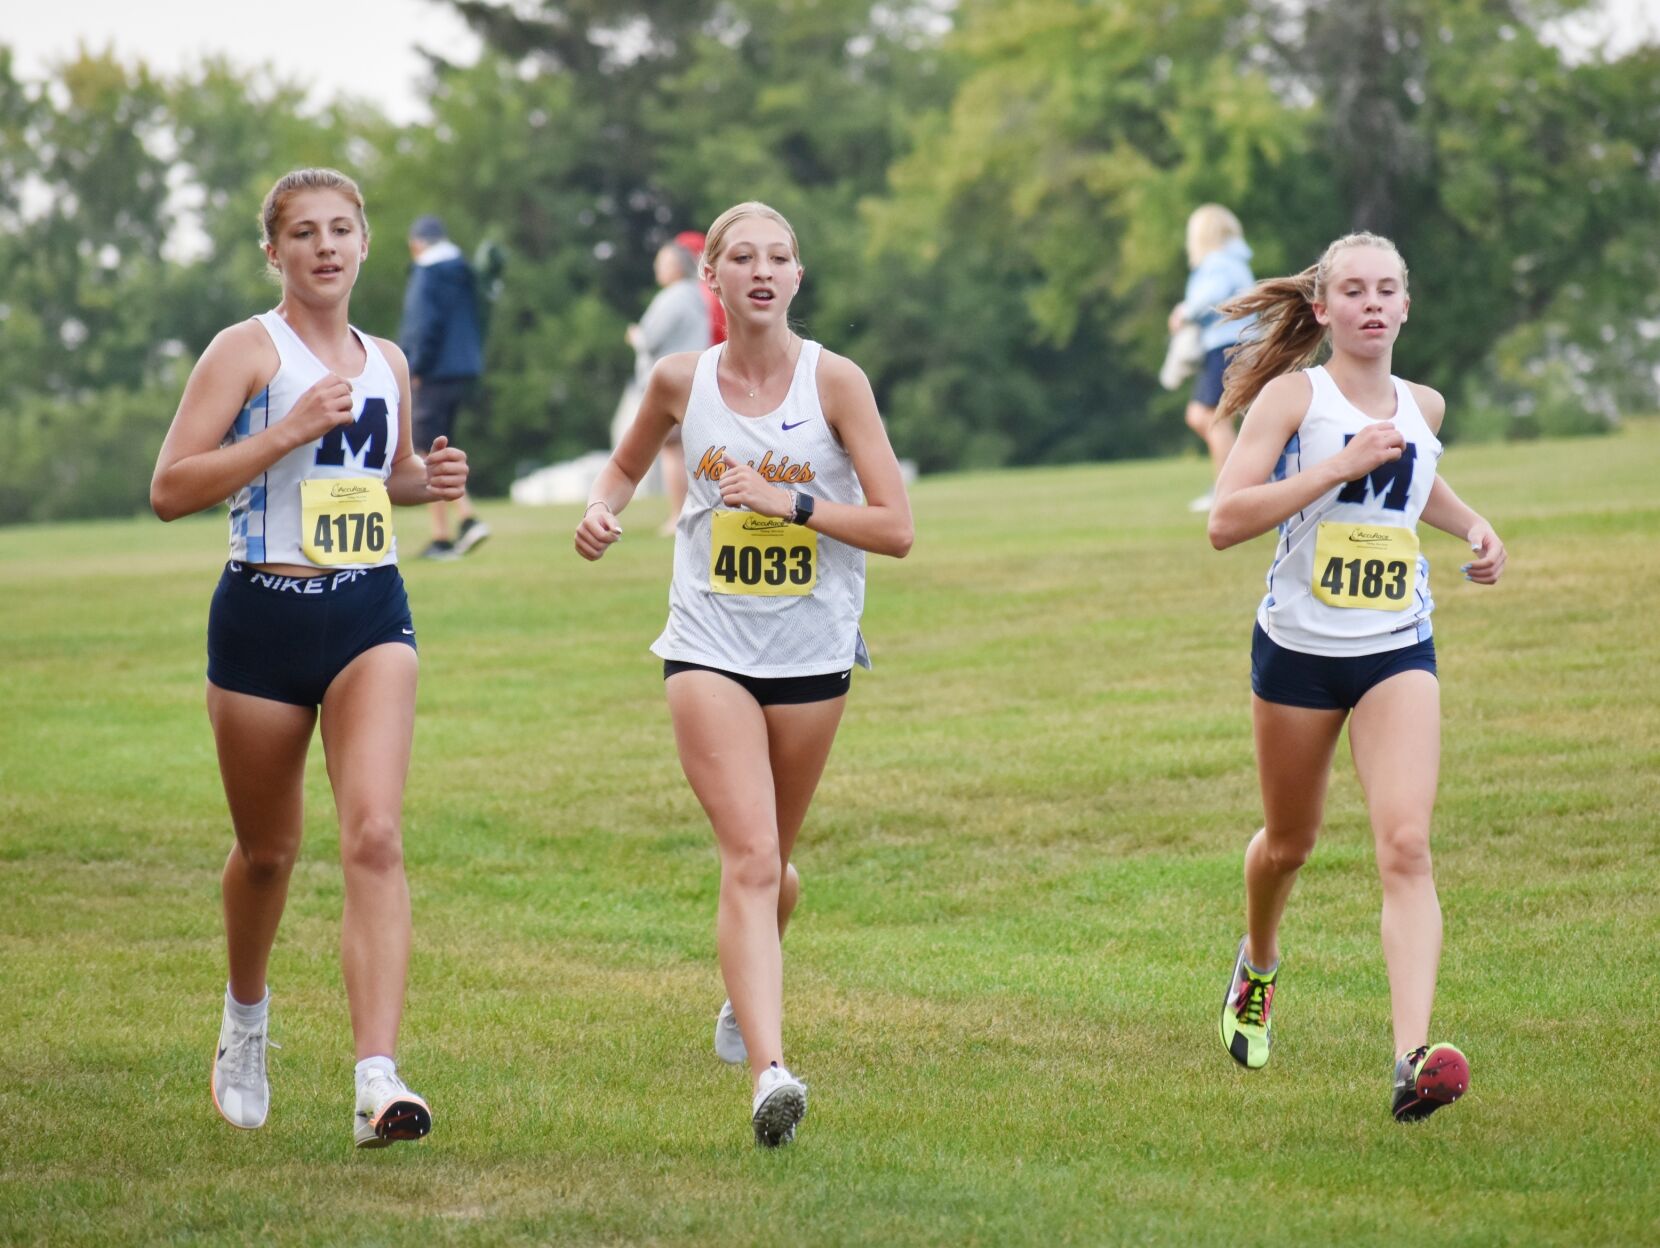 Cross country: Bussiere, Oberg propel Norski girls to Mount Horeb Invite title